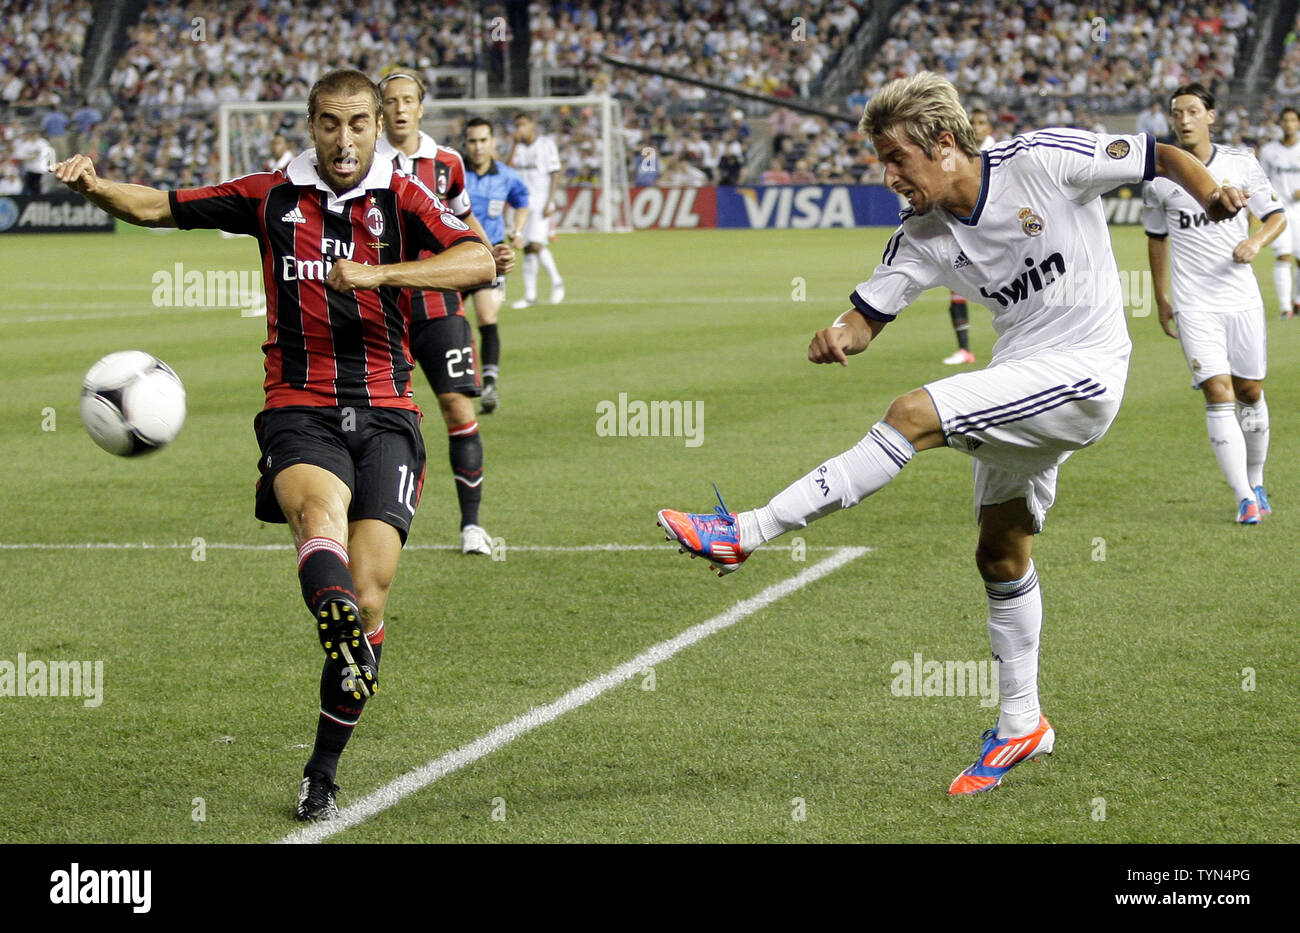 Real Madrid Fabio Coentrao takes a shot at the goal in the first half against A.C. Milan at the Herbalife World Football Match Challenge 2012 at Yankee Stadium in New York City on August 8, 2012. Real Madrid defeated A.C. Milan 5-1.     UPI/John Angelillo Stock Photo